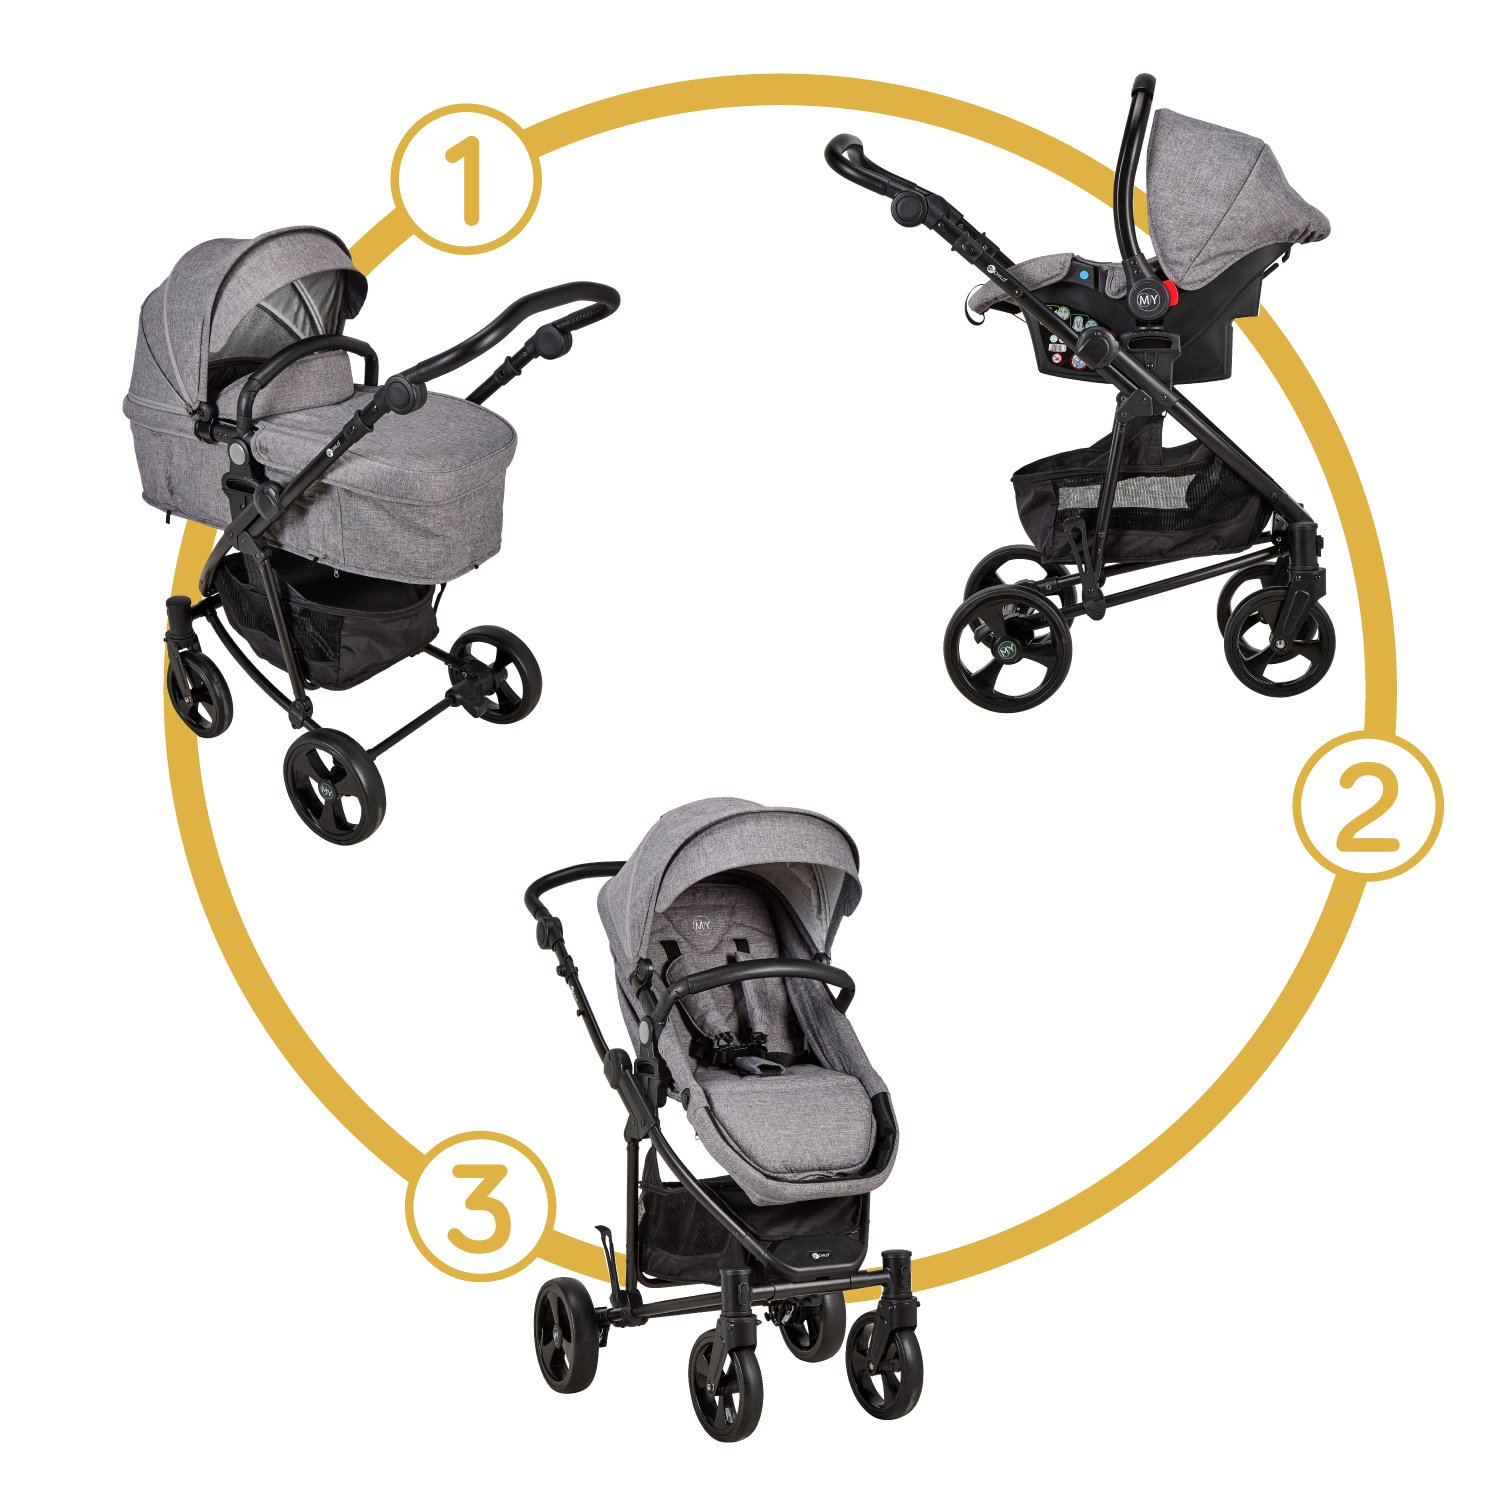 MyChild Toco Vamos Convertible Stroller Travel System Review